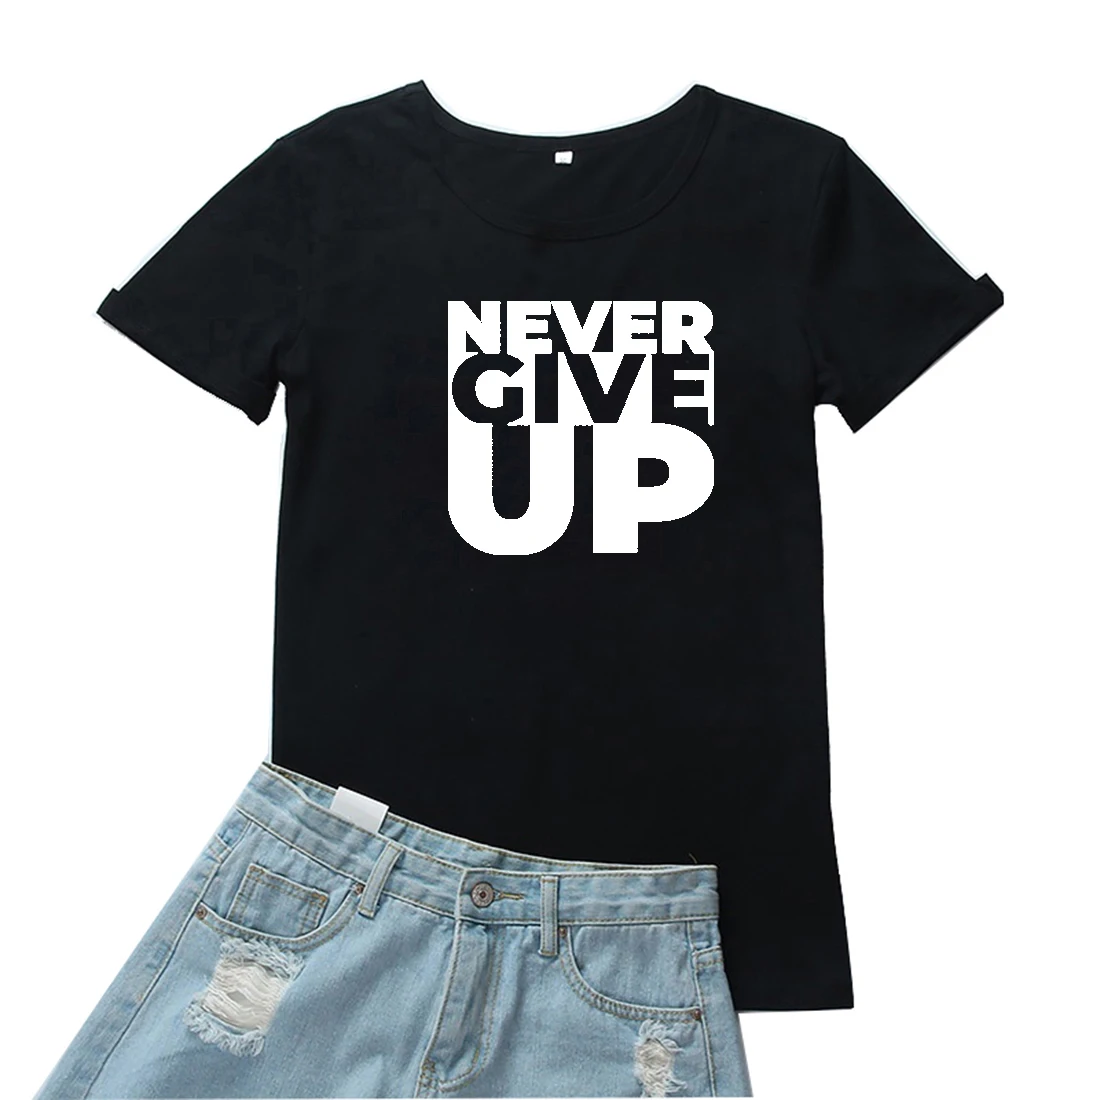 

Never Give Up Tee Women Cotton Black Red Letter Pattern Camiseta Mujer O-neck Tops Tshirt Women Vintage Casual Women T-shirts